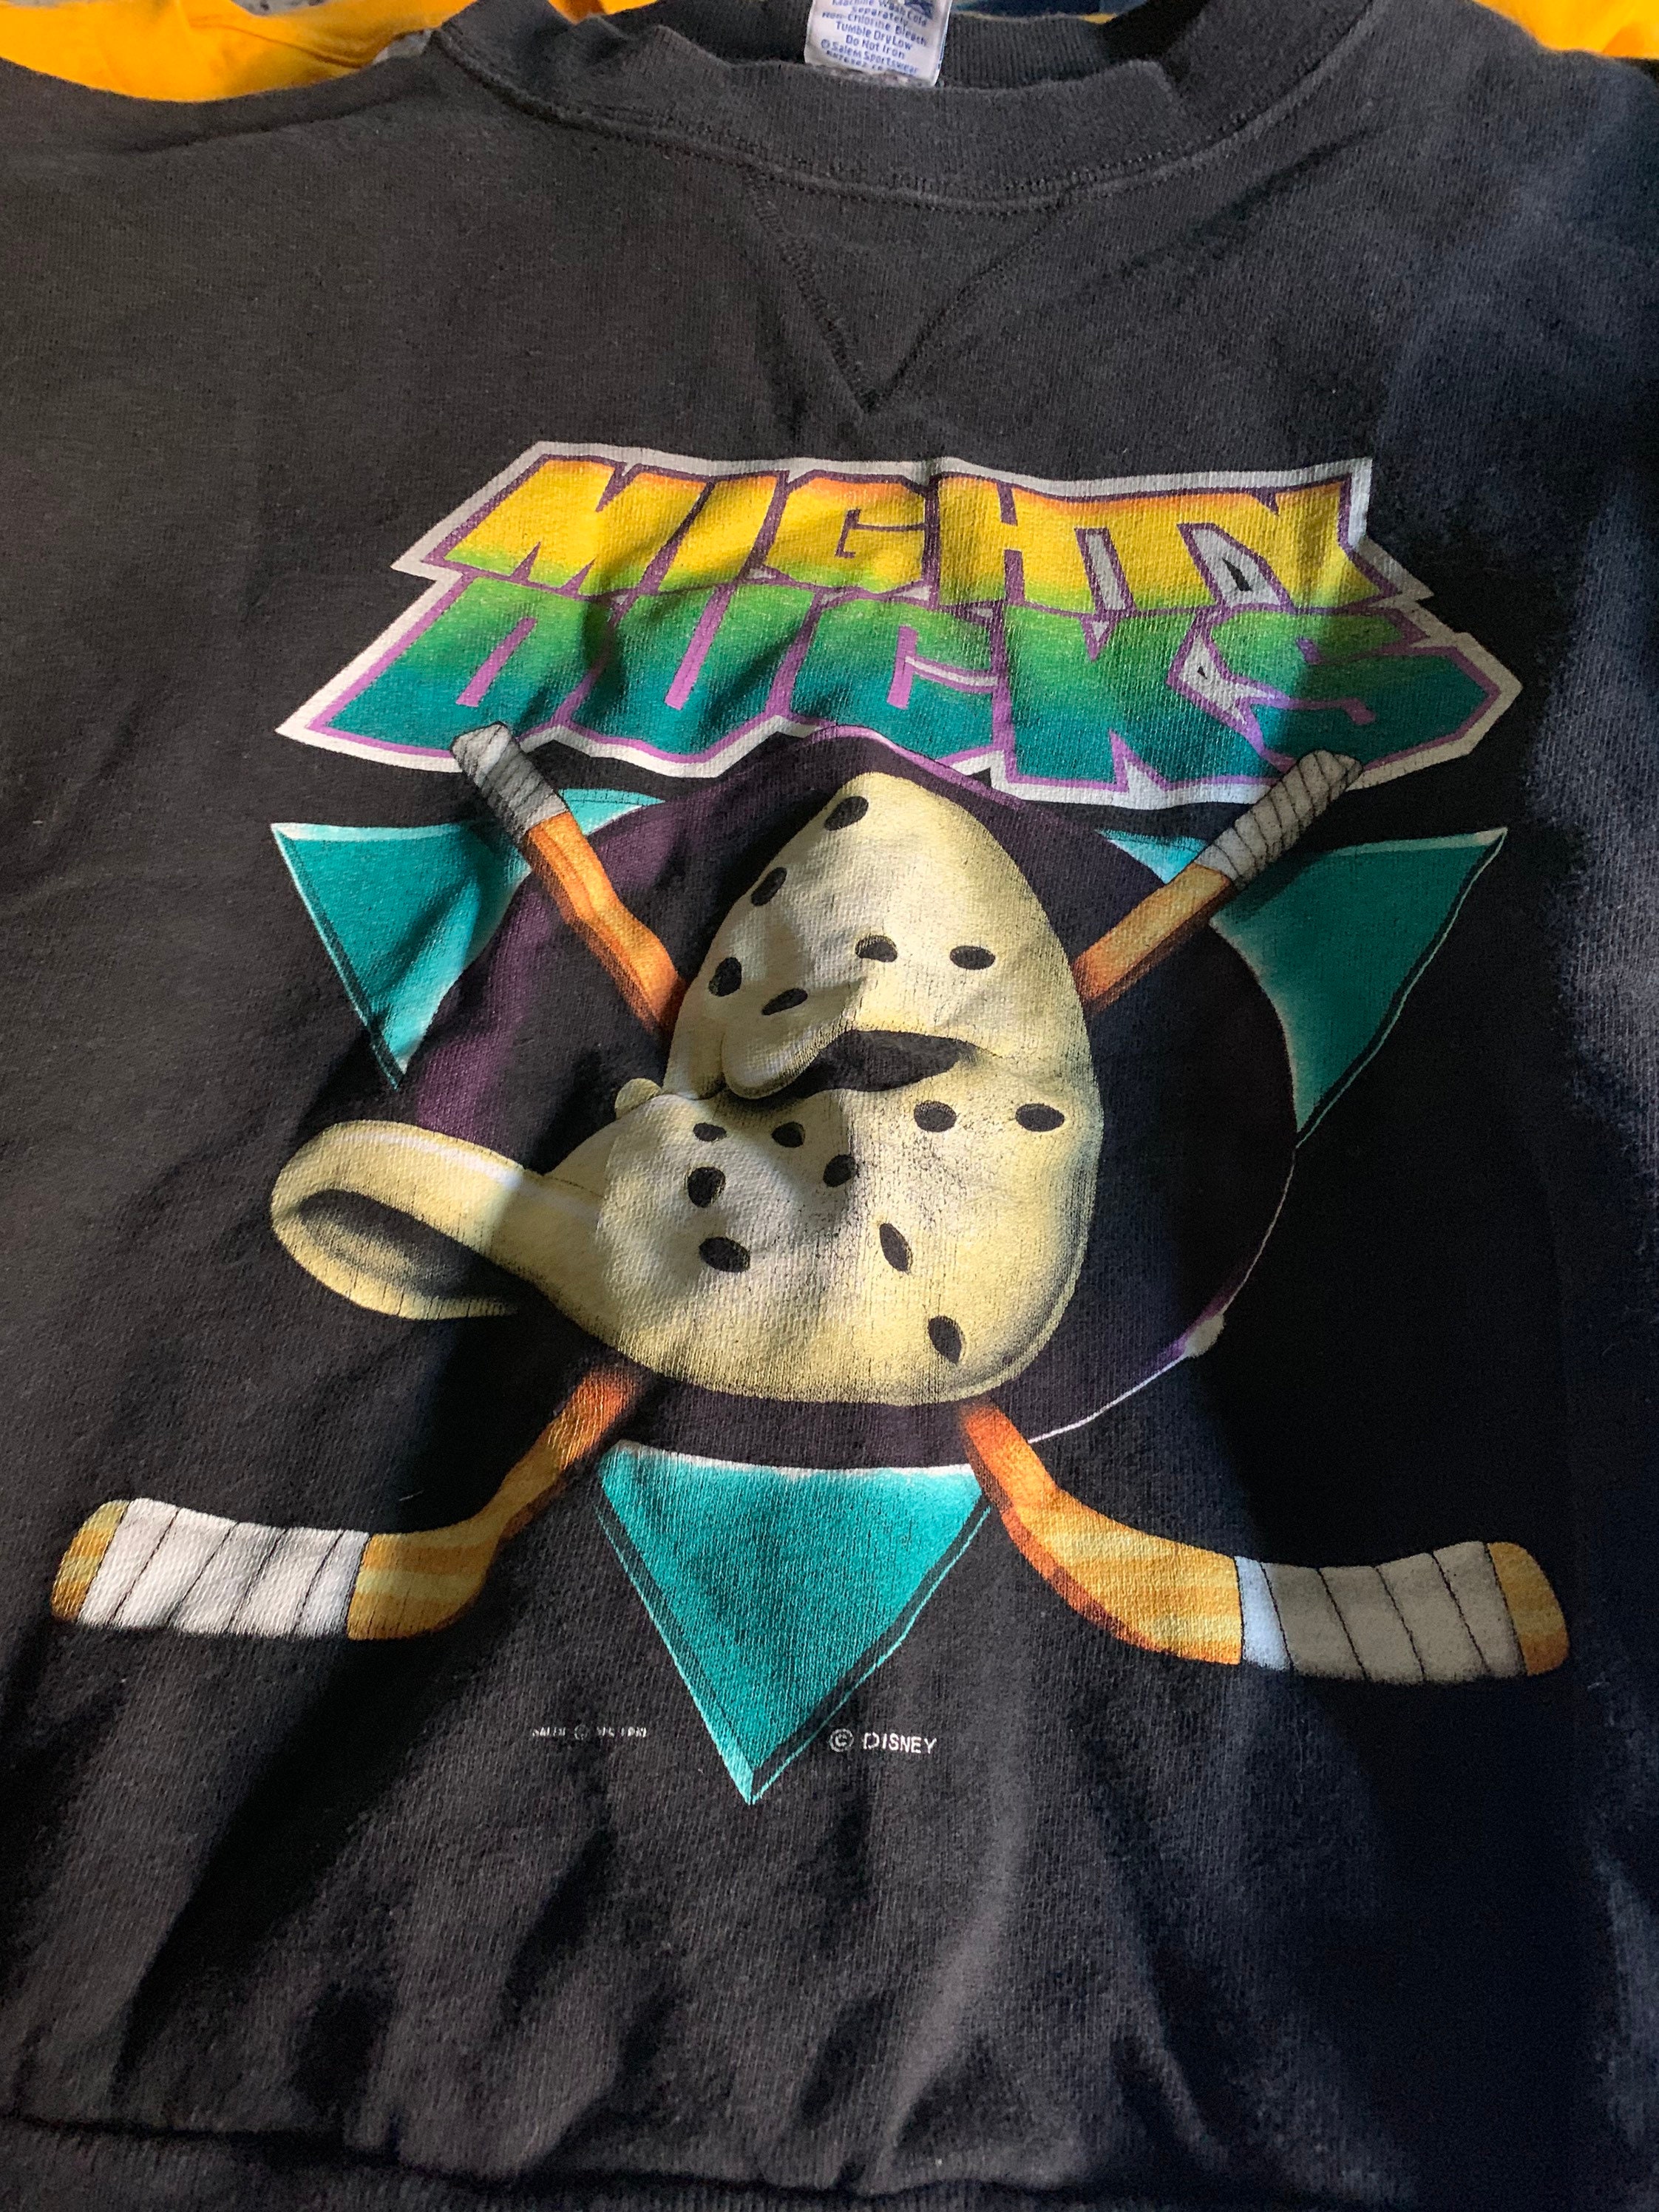 Vintage Anaheim Mighty Ducks All Over Print T-shirt NWOT NHL Hockey 90s –  For All To Envy